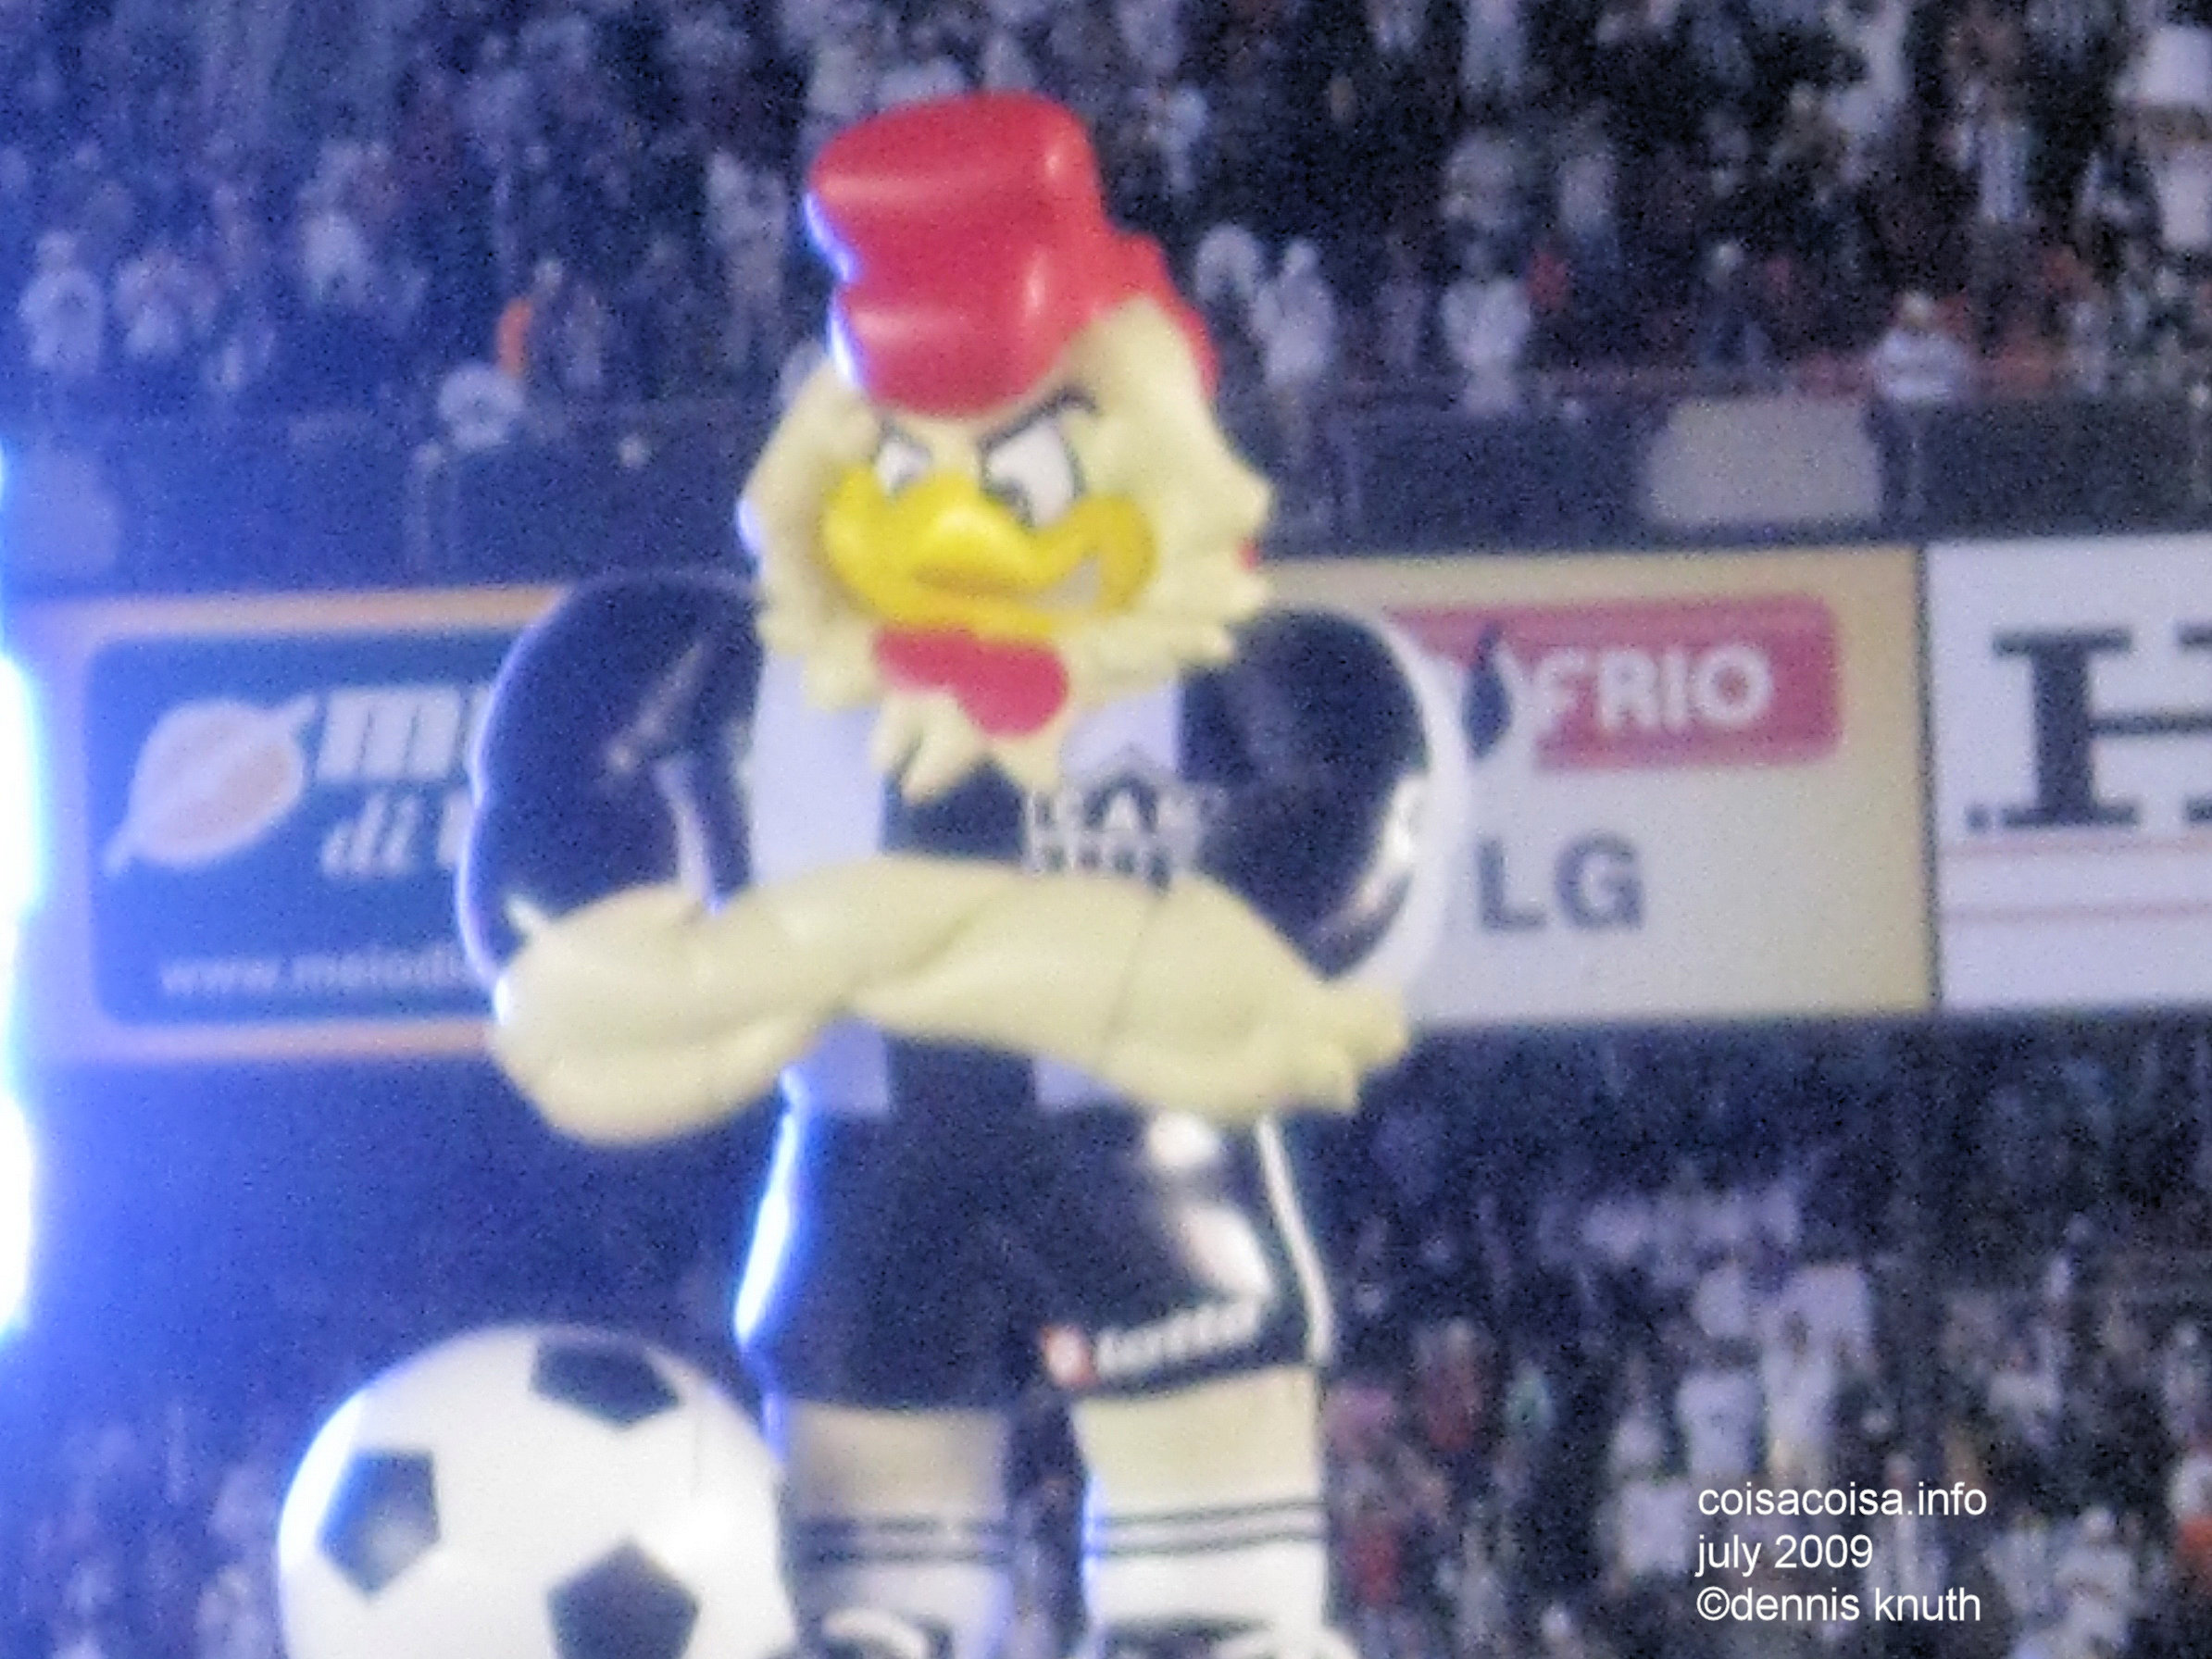 Galo, the big rooster, Won the game